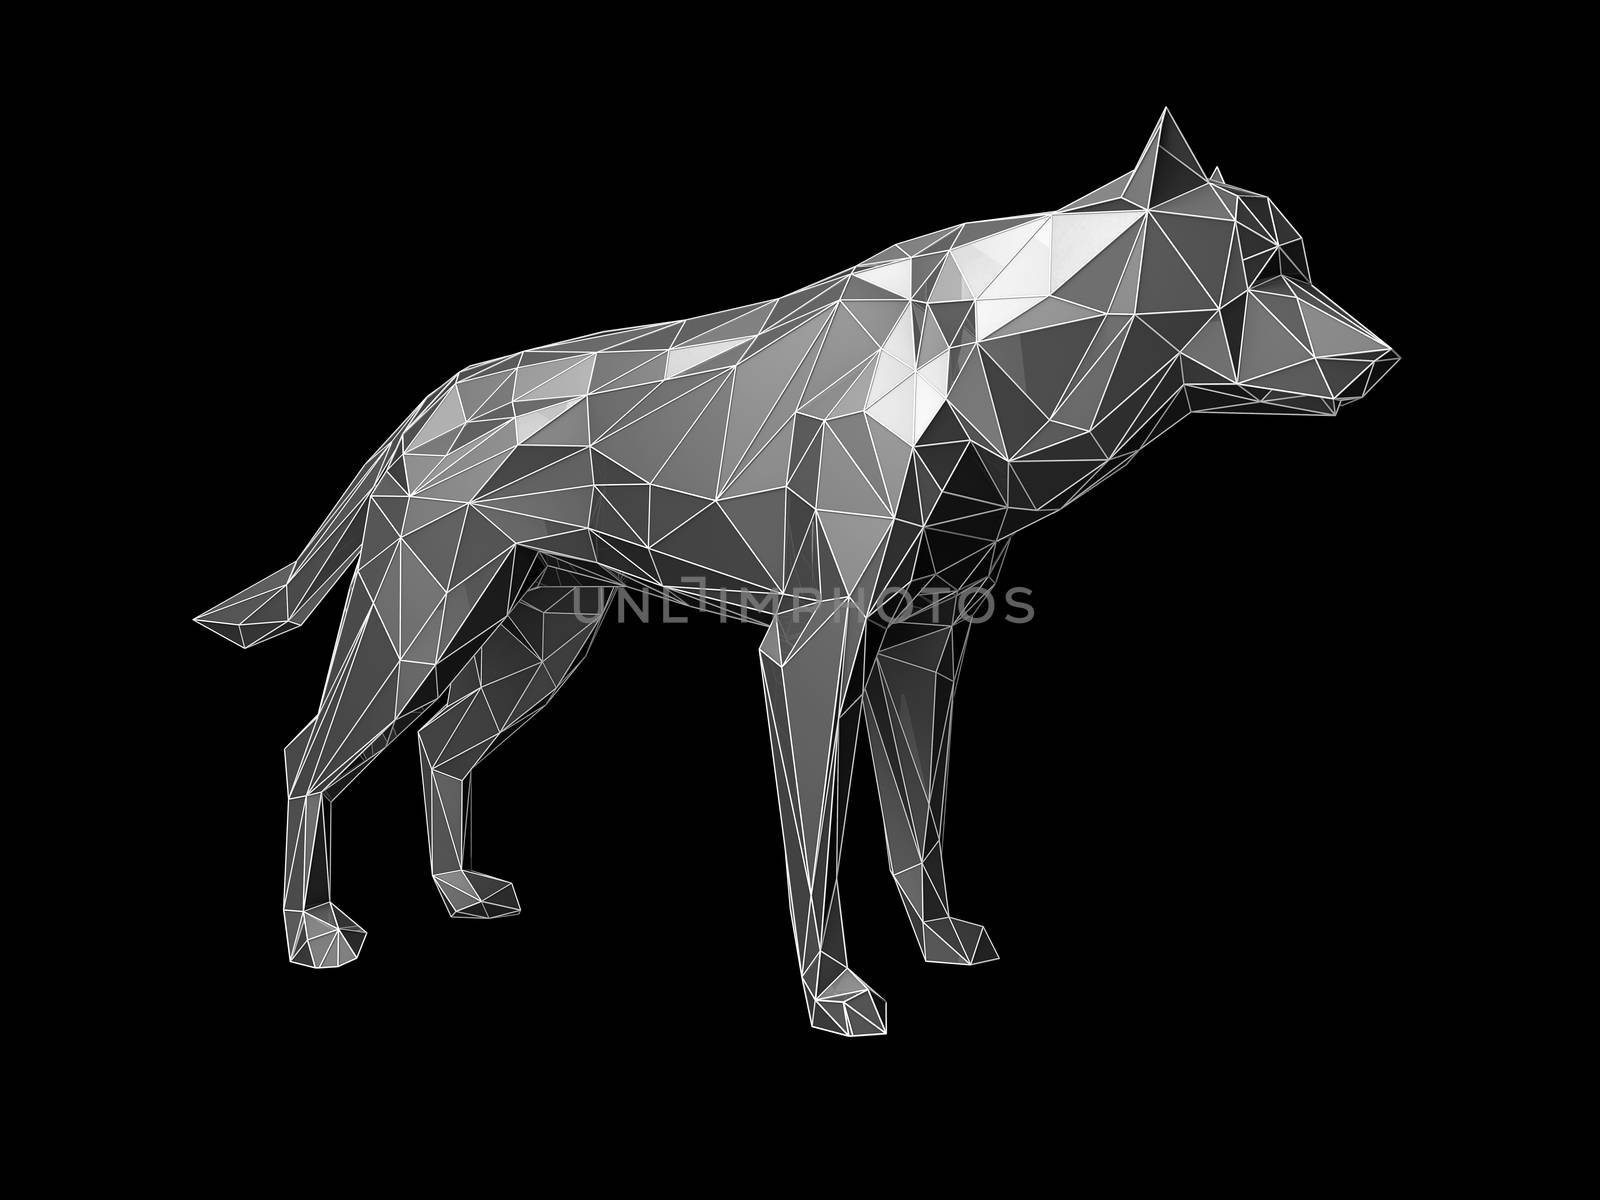 Low poly wolf portrait. Abstract polygonal 3d illustration